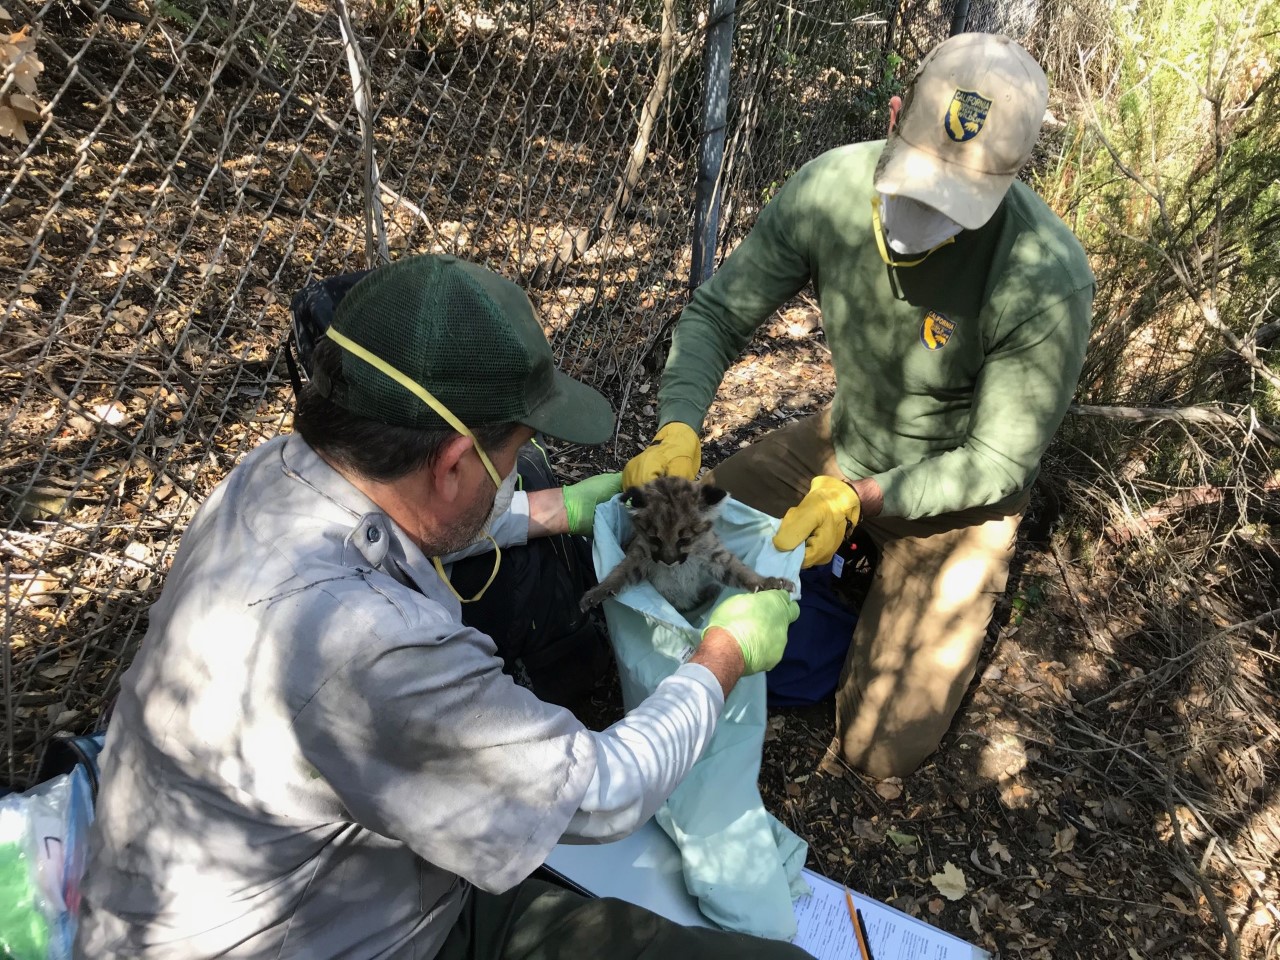 Two biologists - one from the NPS and the other from CDFW - conduct a workup on a mountain lion kitten.